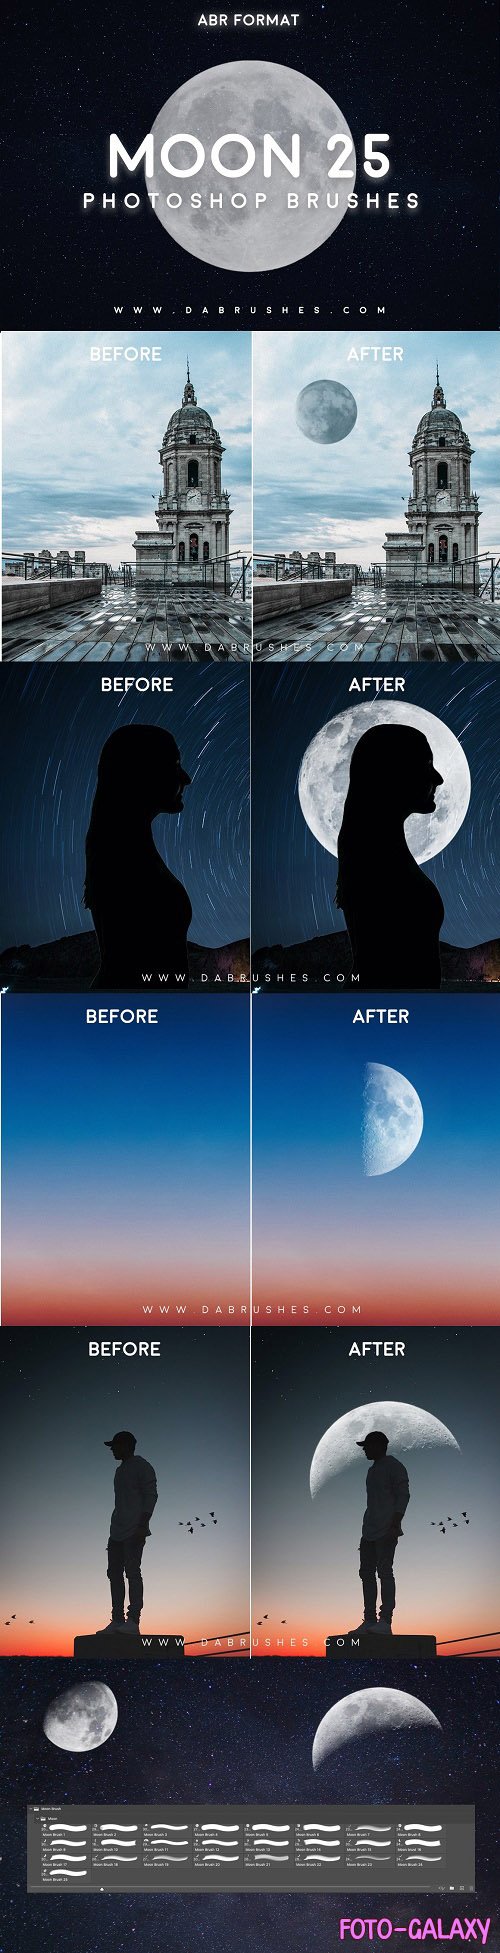 25 Moon Brushes For Photoshop - 6036825